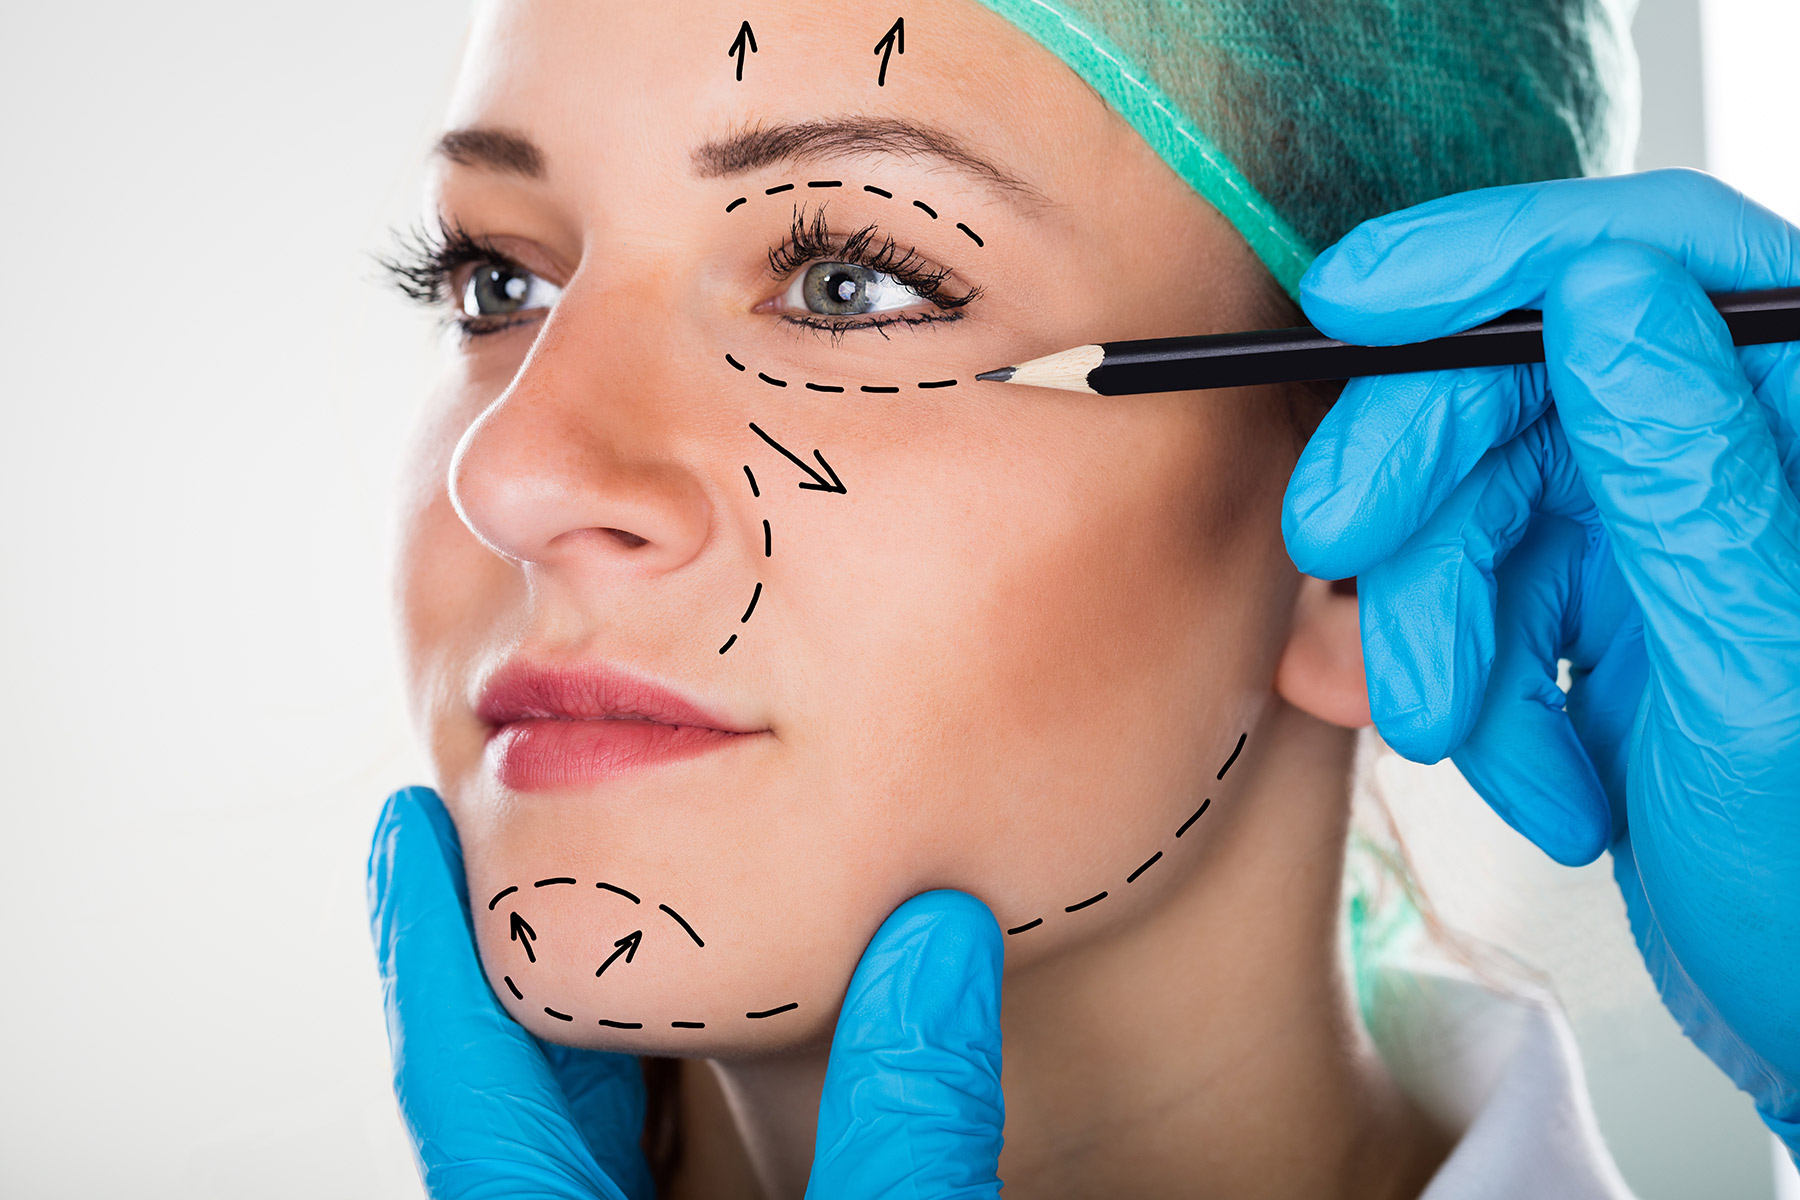 beauty surgery after effect sample video free download